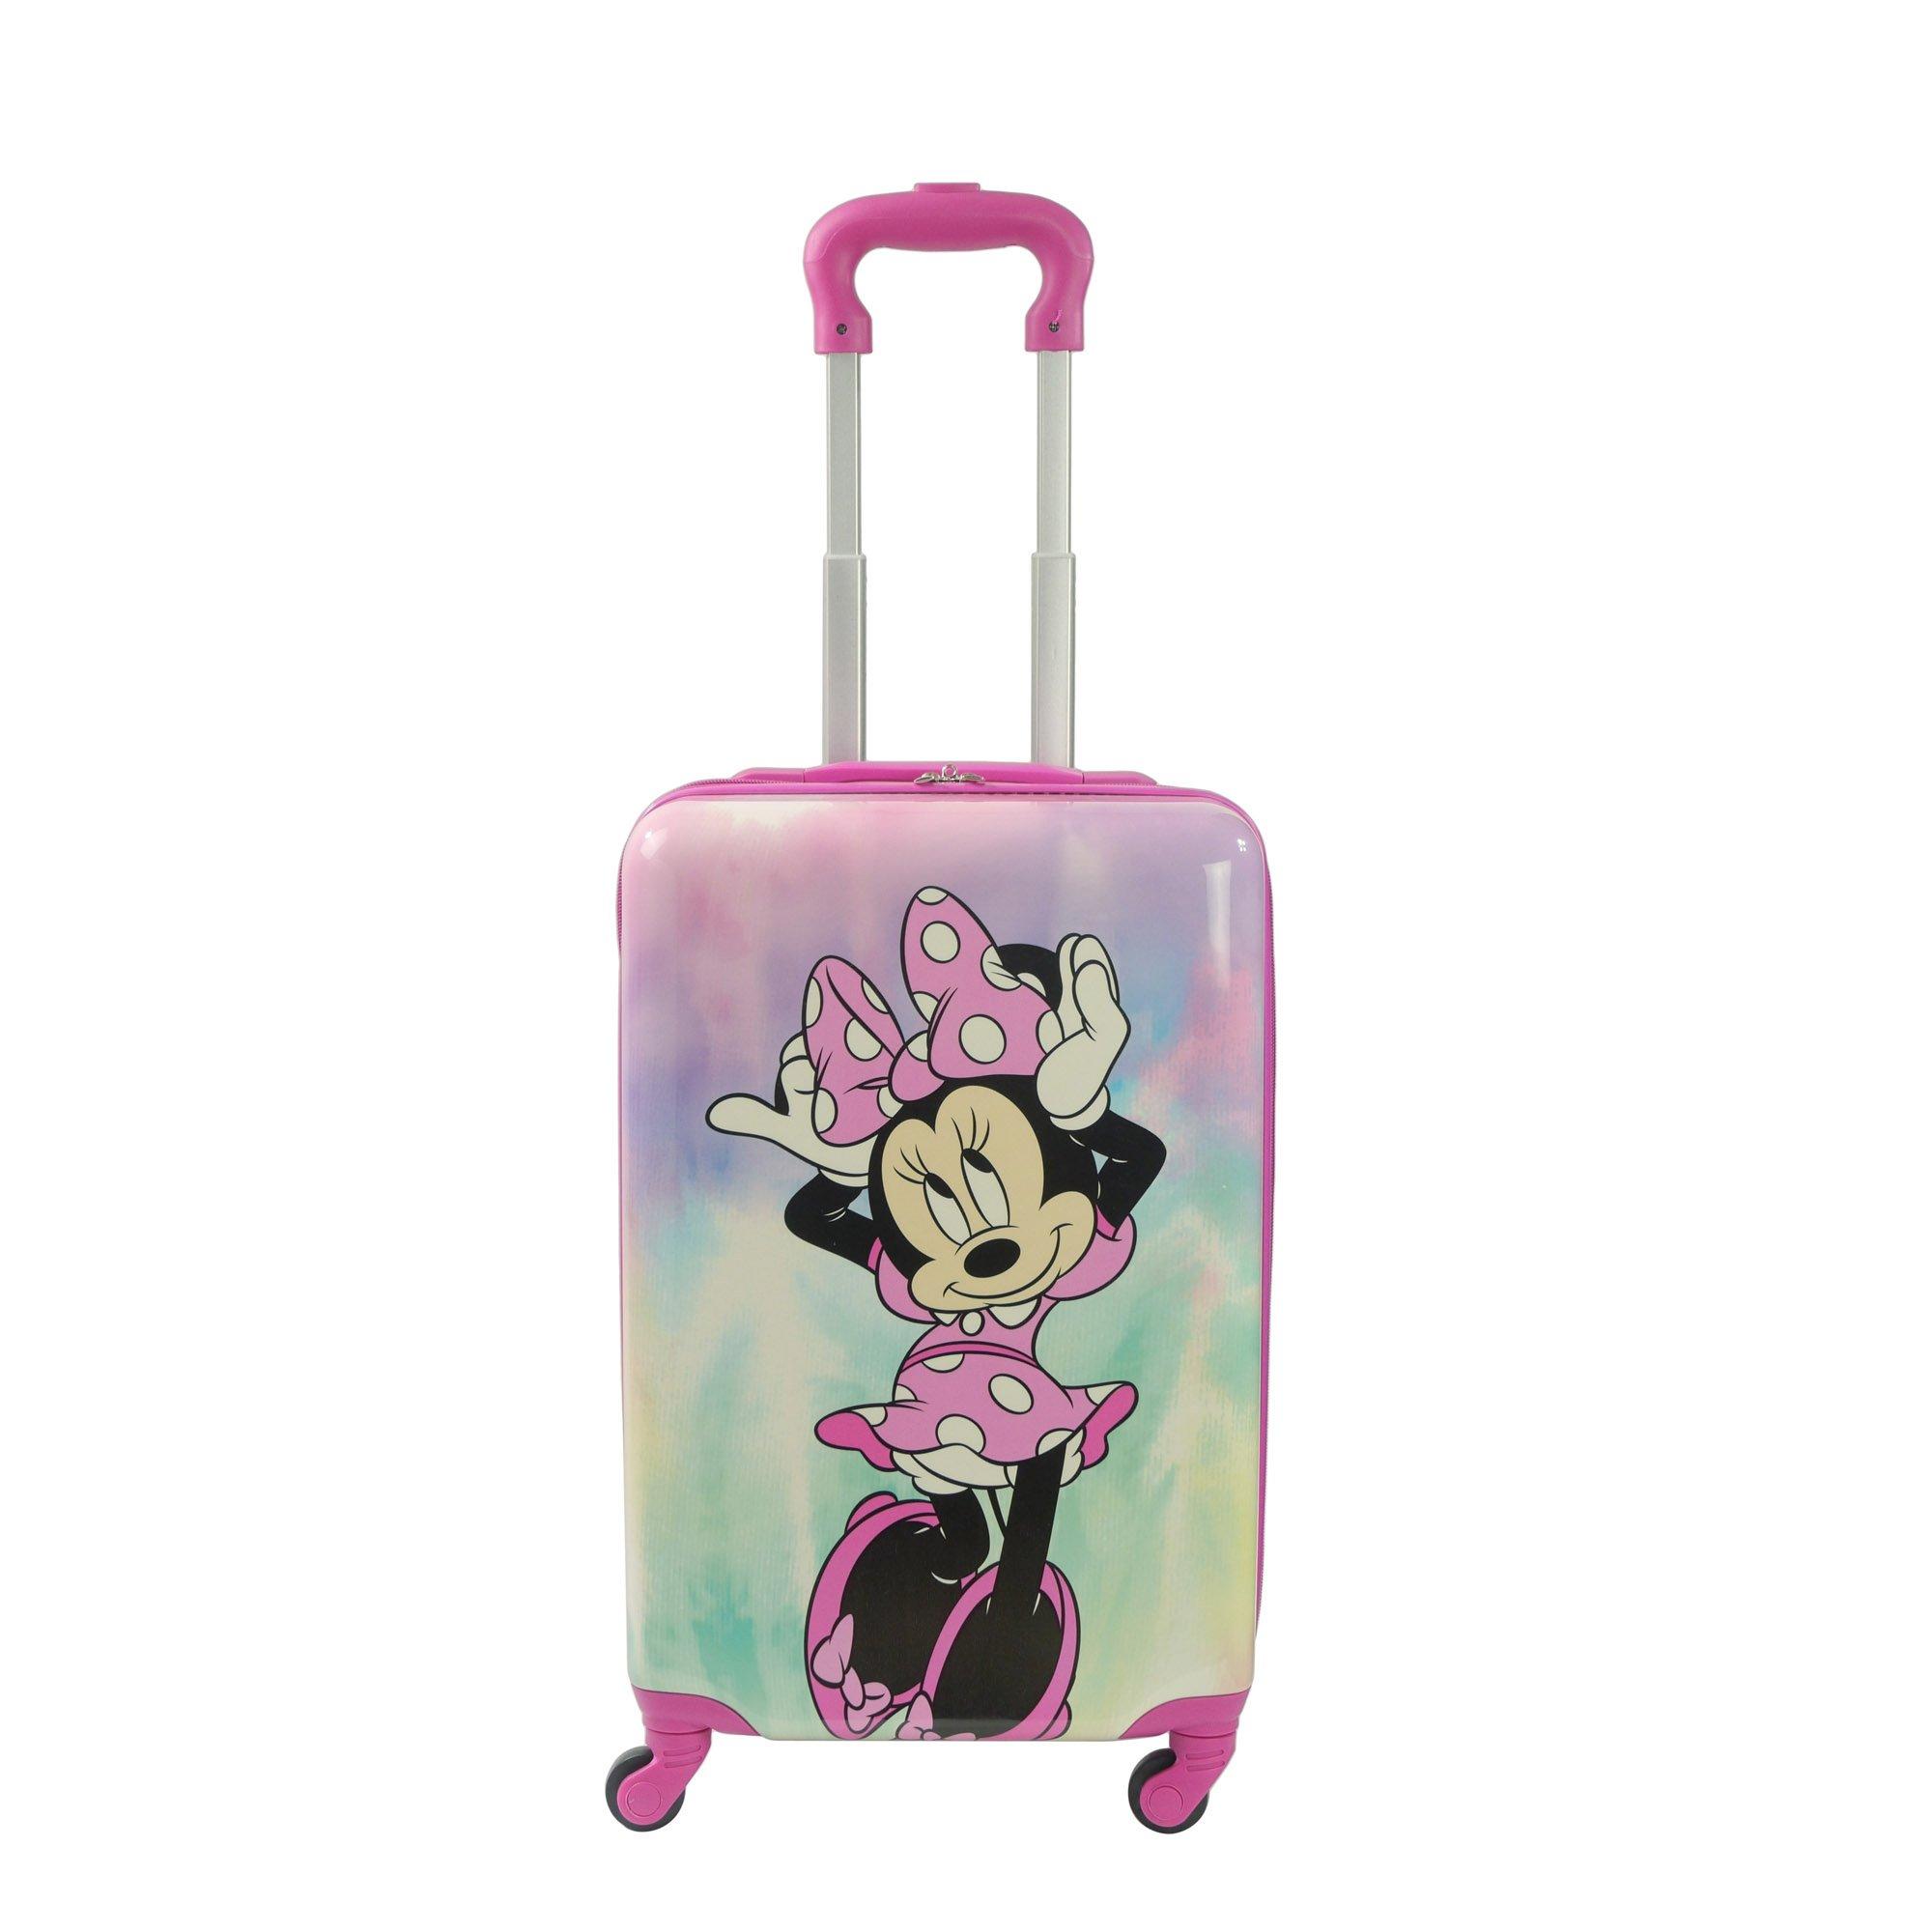 FUL Disney Minnie Mouse Pastel Kids 21-in Hard-Sided Carry-On Luggage